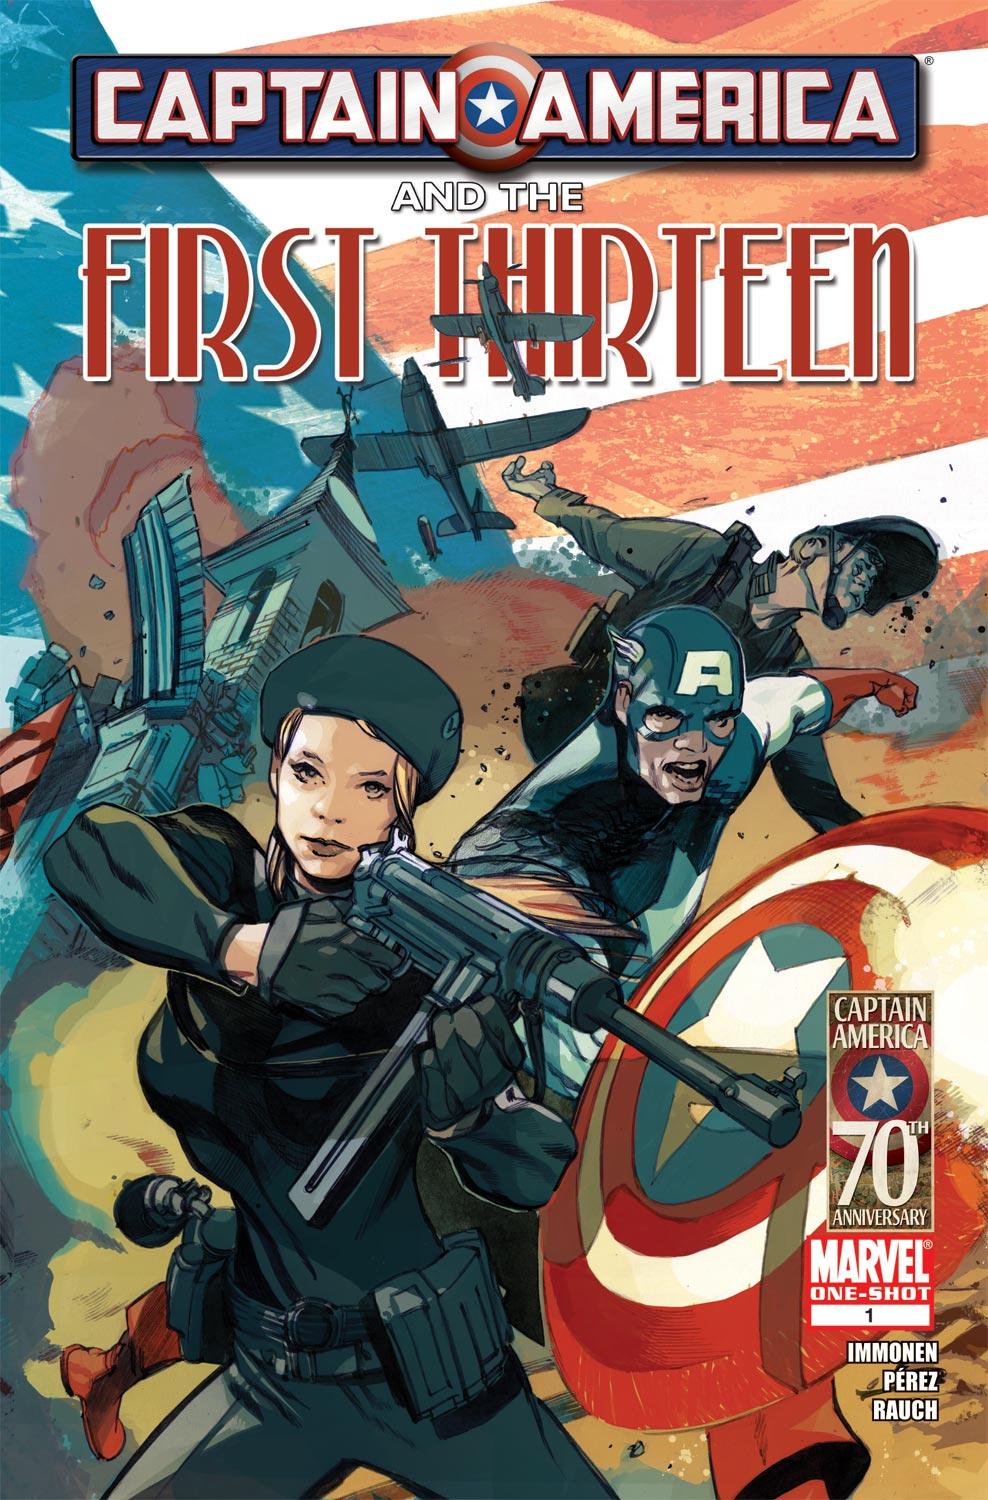 Captain America and the First Thirteen (2011) #1